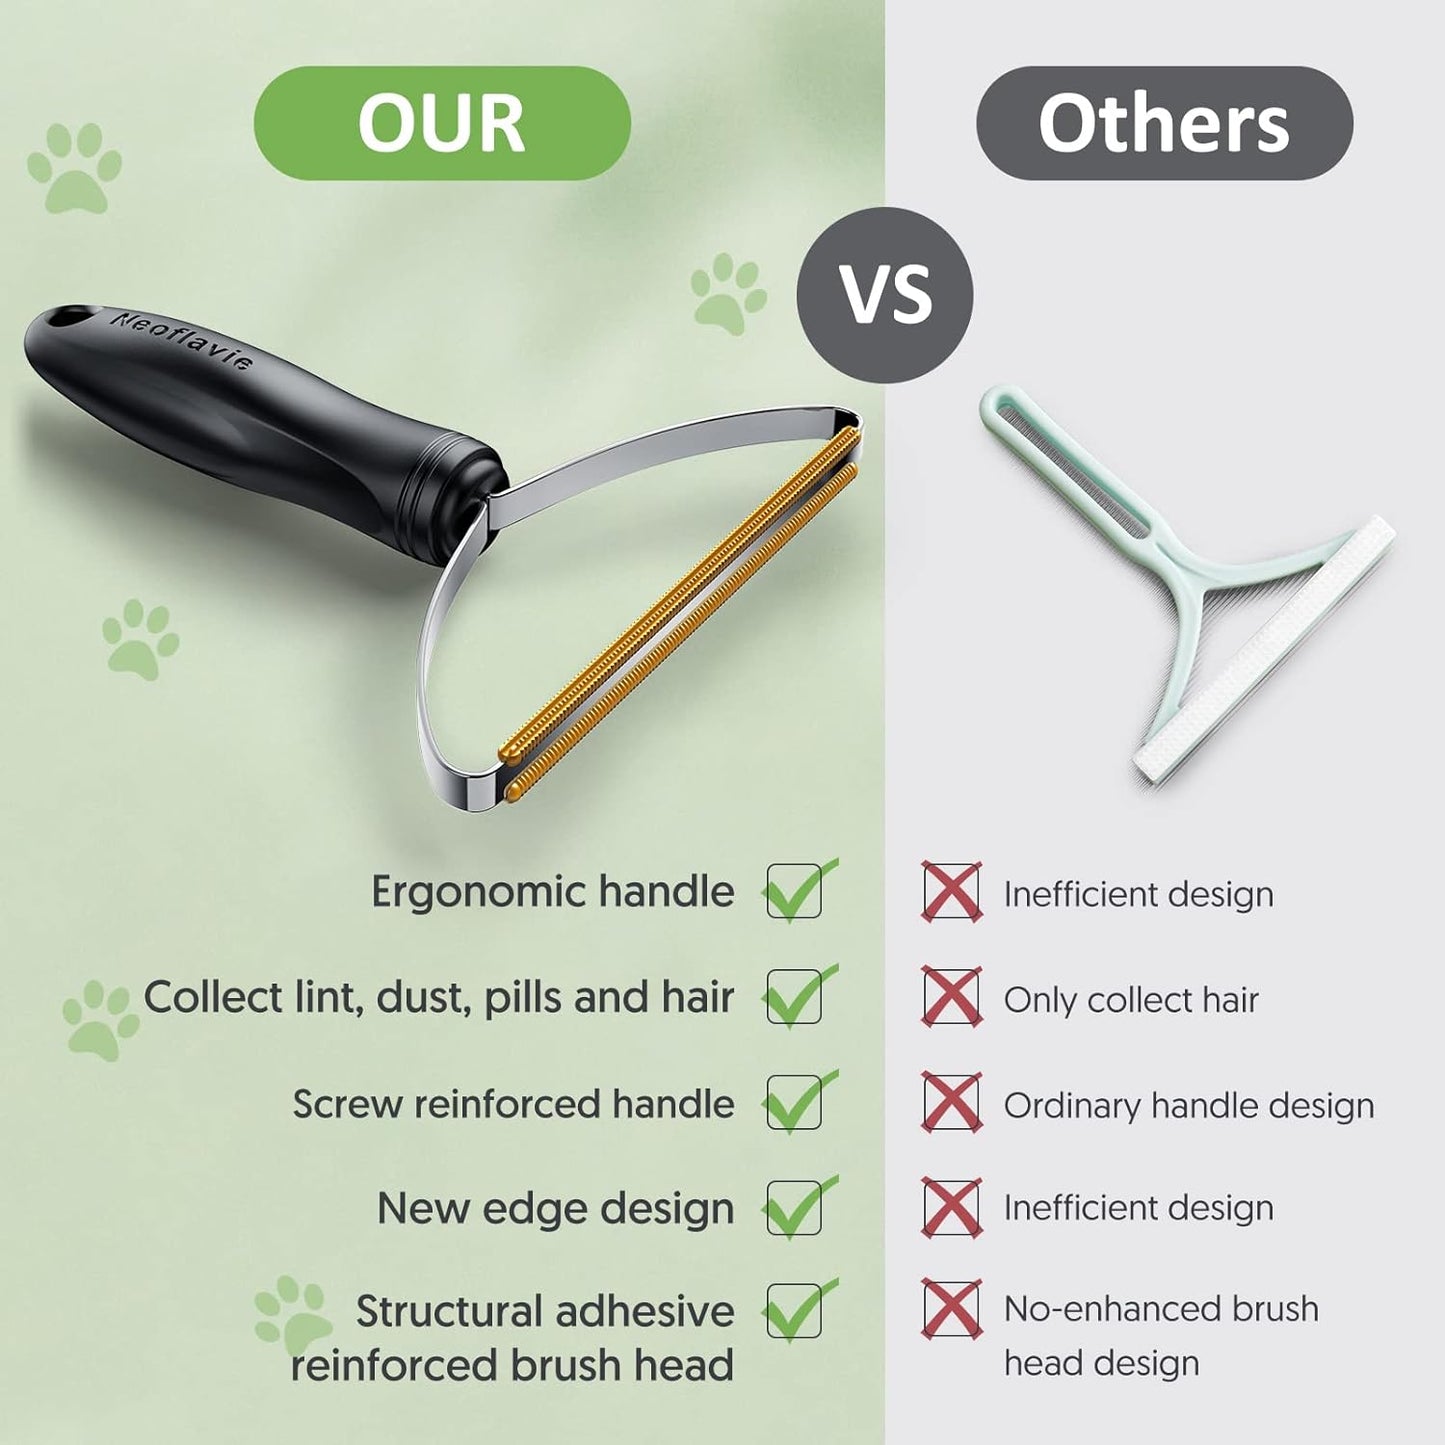 Pet Hair Remover, Neoflavie Pet Hair Cleaner - Reusable Cat and Dog Hair Remover, Lint Cleaner for Couch, Carpet, Pet Towers, Clothes, Car, Furniture, Effective and Fast Pet Hair Cleaner.